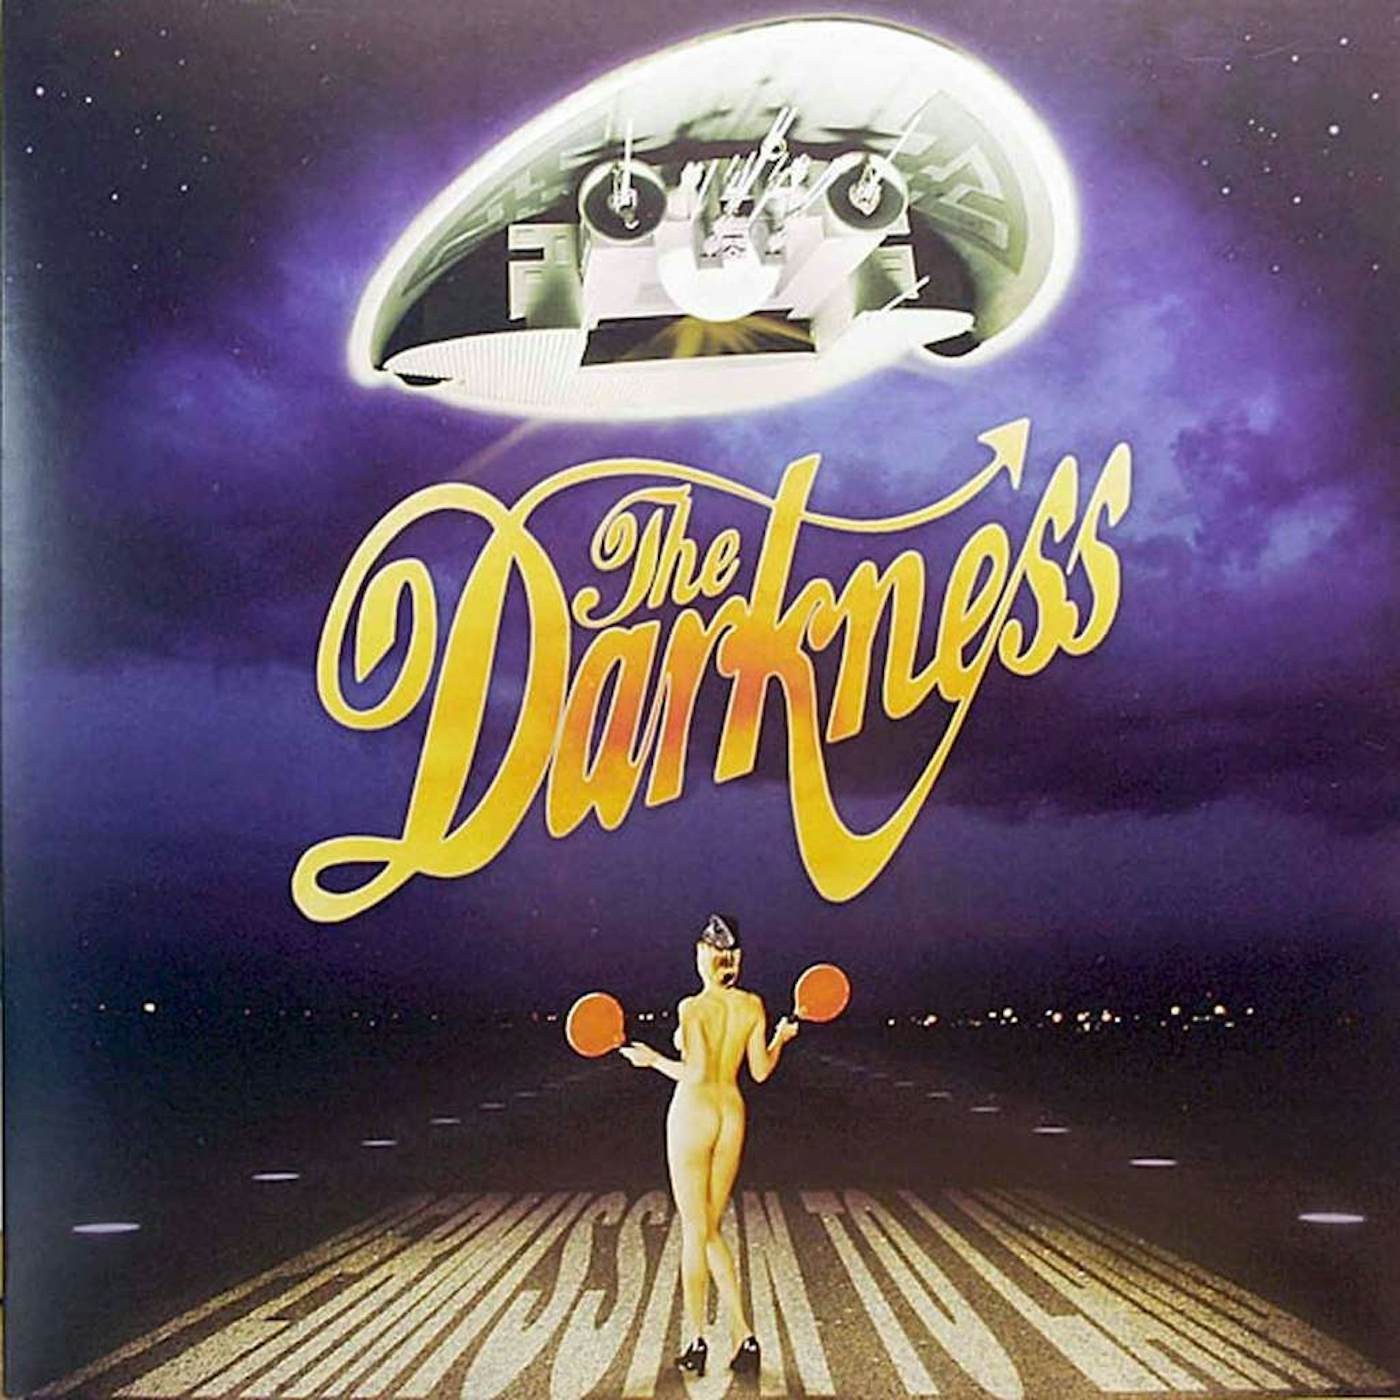 The Darkness - Permission To Land (Vinyl)